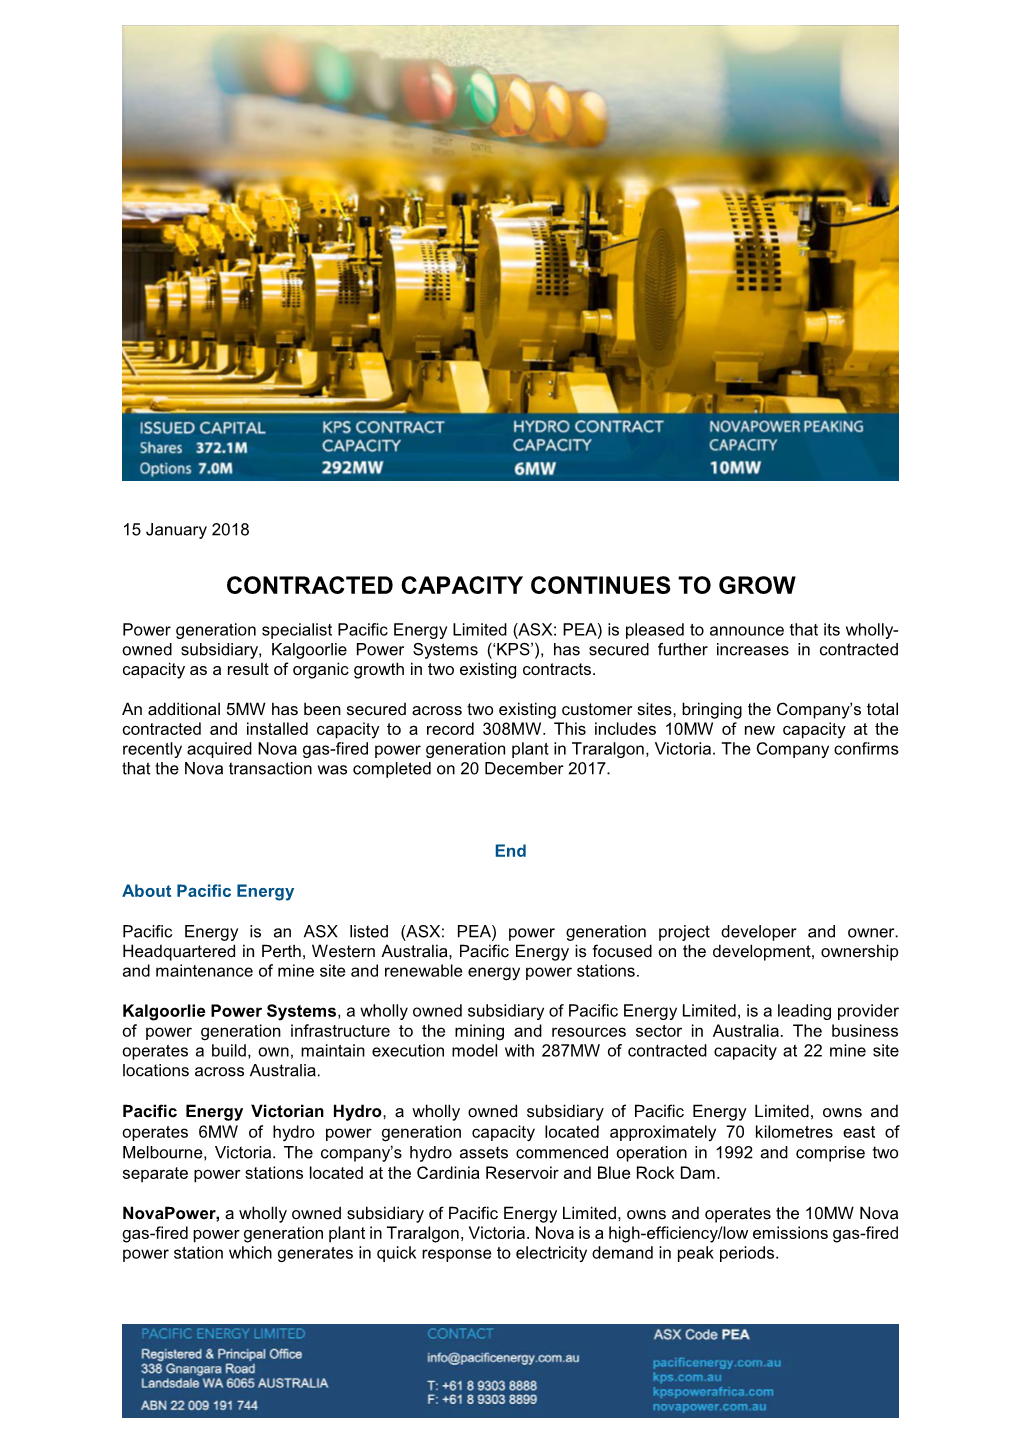 Contracted Capacity Continues to Grow